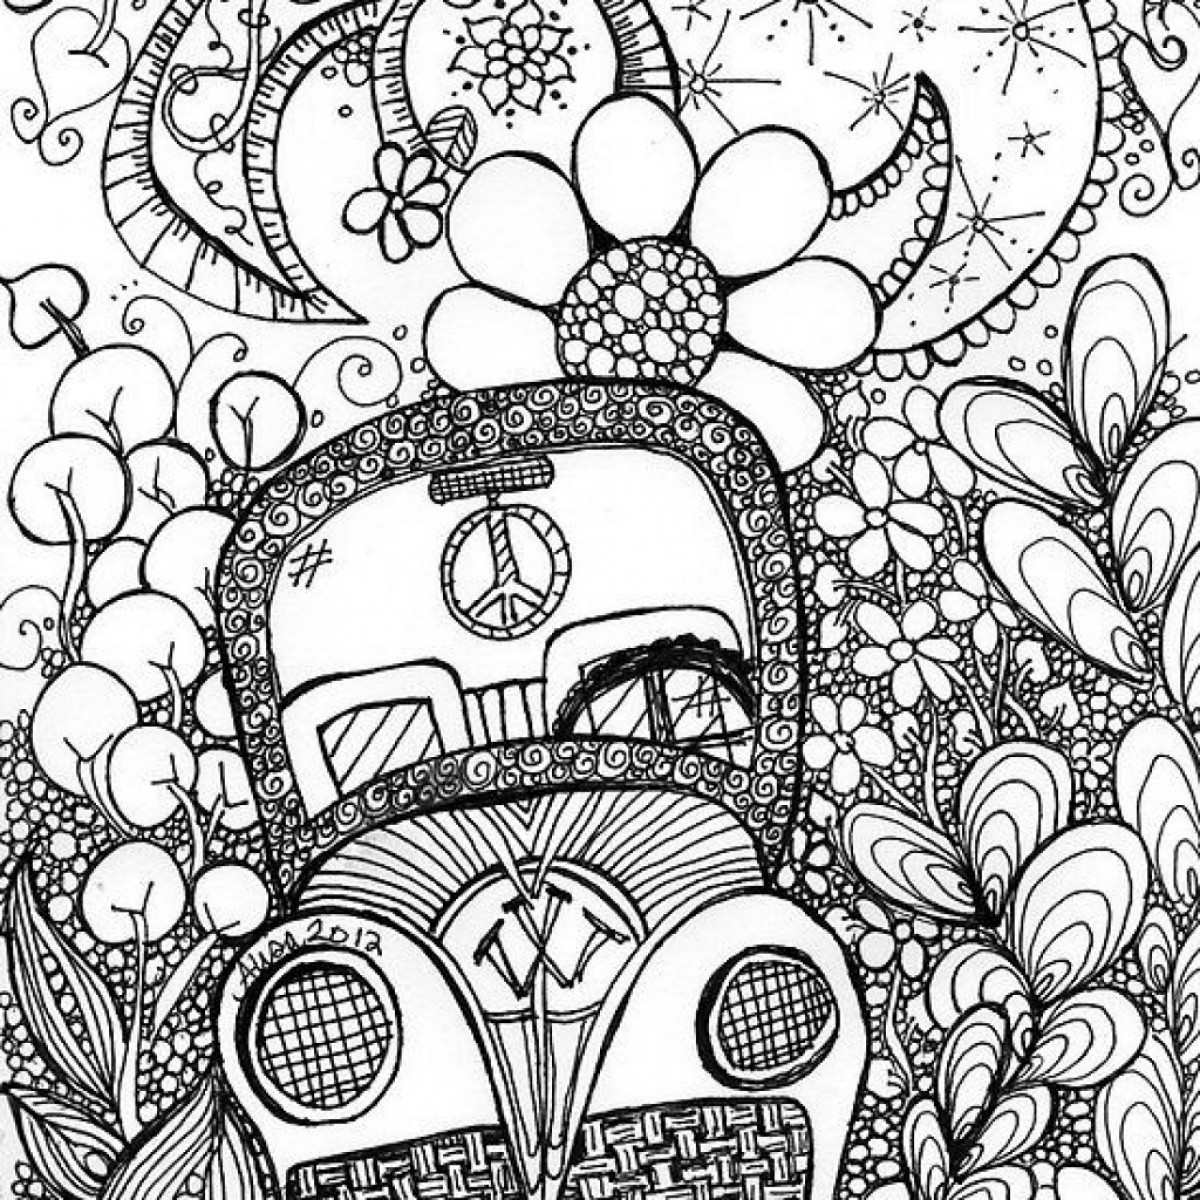 Trippy Adult Coloring Books
 Get This Trippy Coloring Pages for Adults AJ21Y